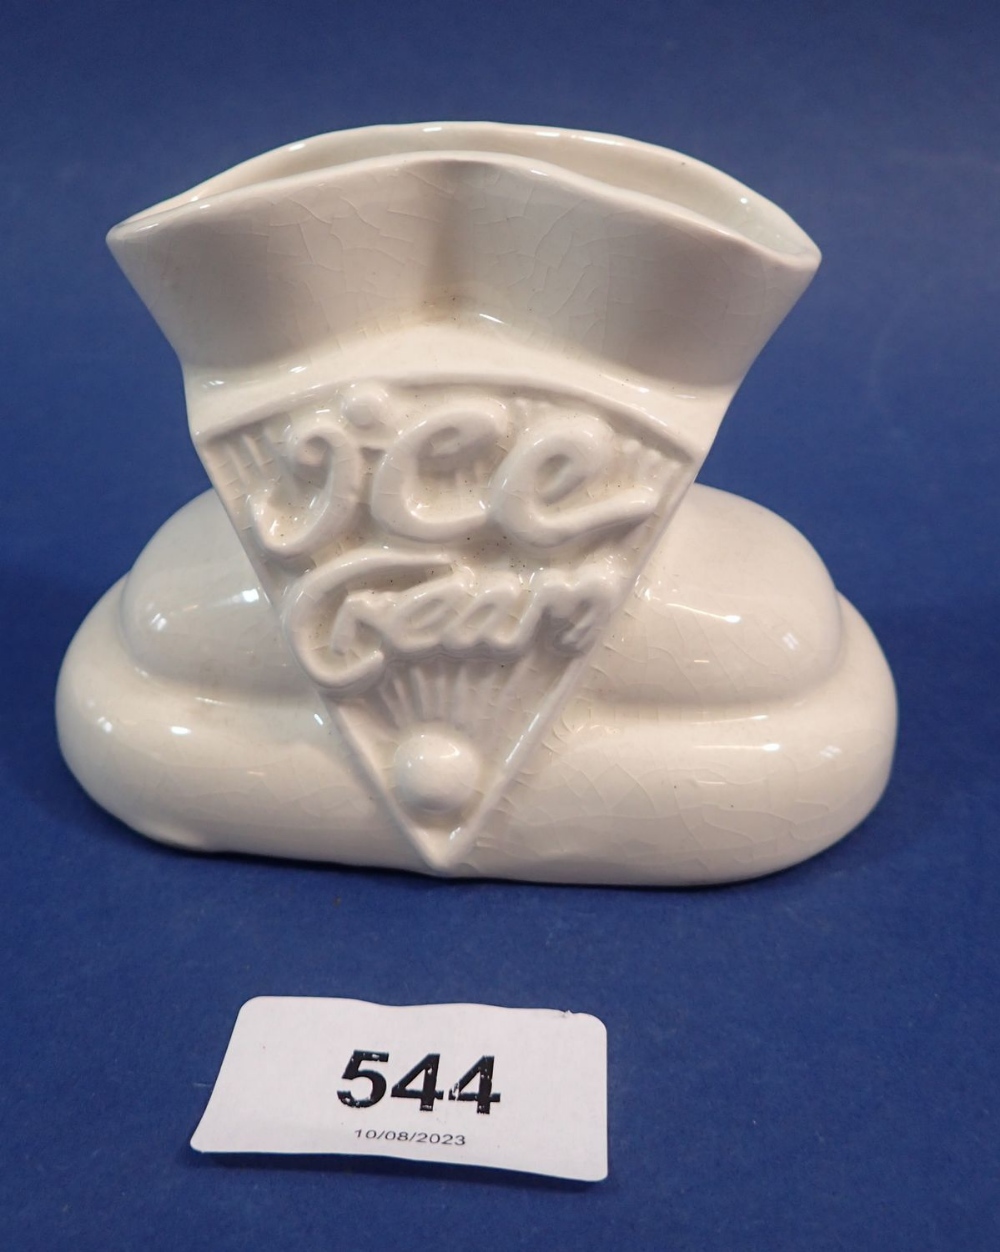 A vintage pottery 'Ice Cream' cone holder